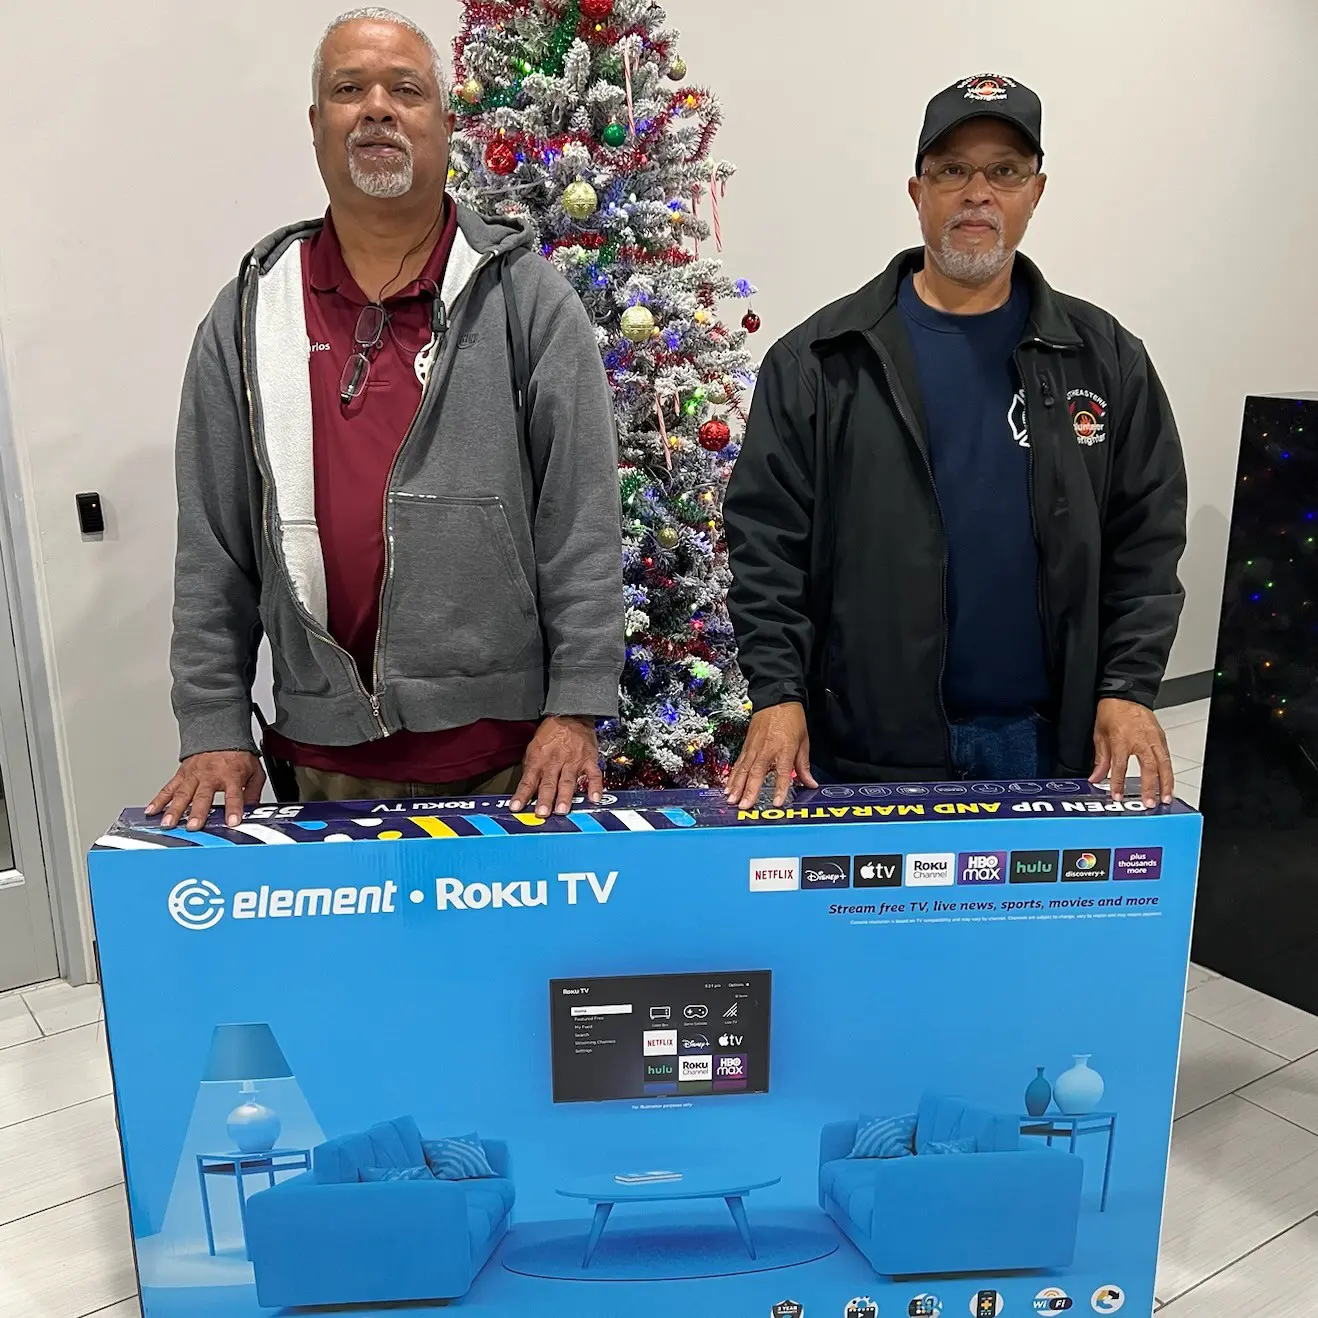 Two men posing with an Element TV box